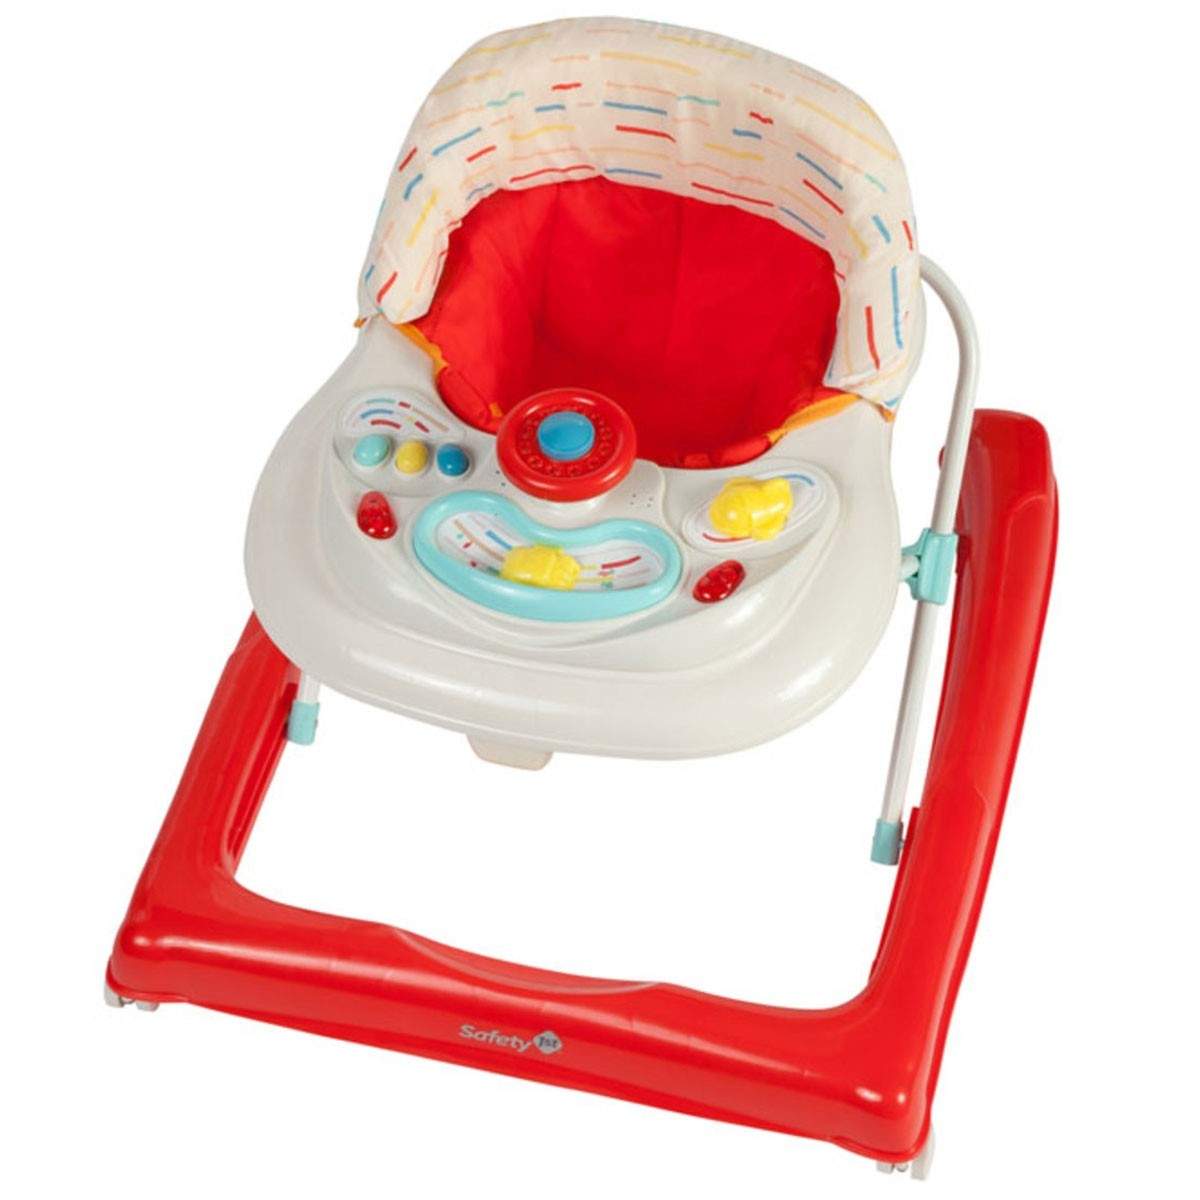 Safety 1st Ludo Walker Reddot || 6months to 36months - Toys4All.in